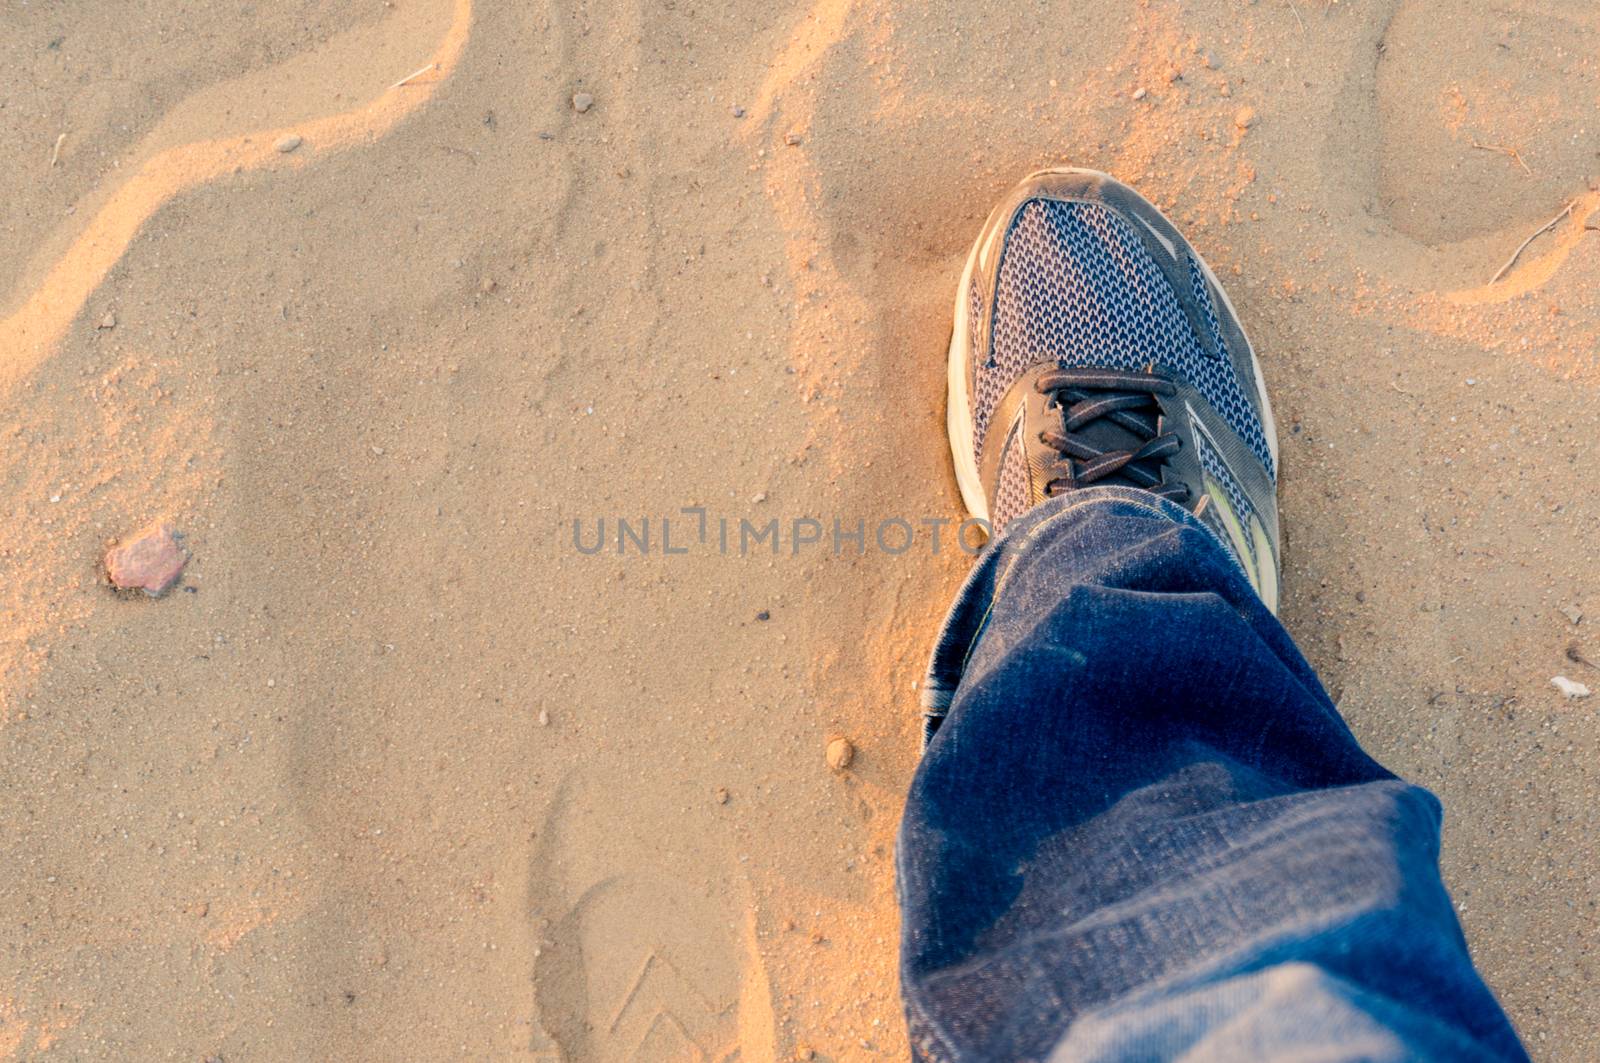 Top down view of man extending a foot with a worn sneaker jeans on dusty sand showing travel and trekking during evening as sunlight bounces off it. Shows wanderlust and travel in India which has been stopped by the lockdown and the epidemic